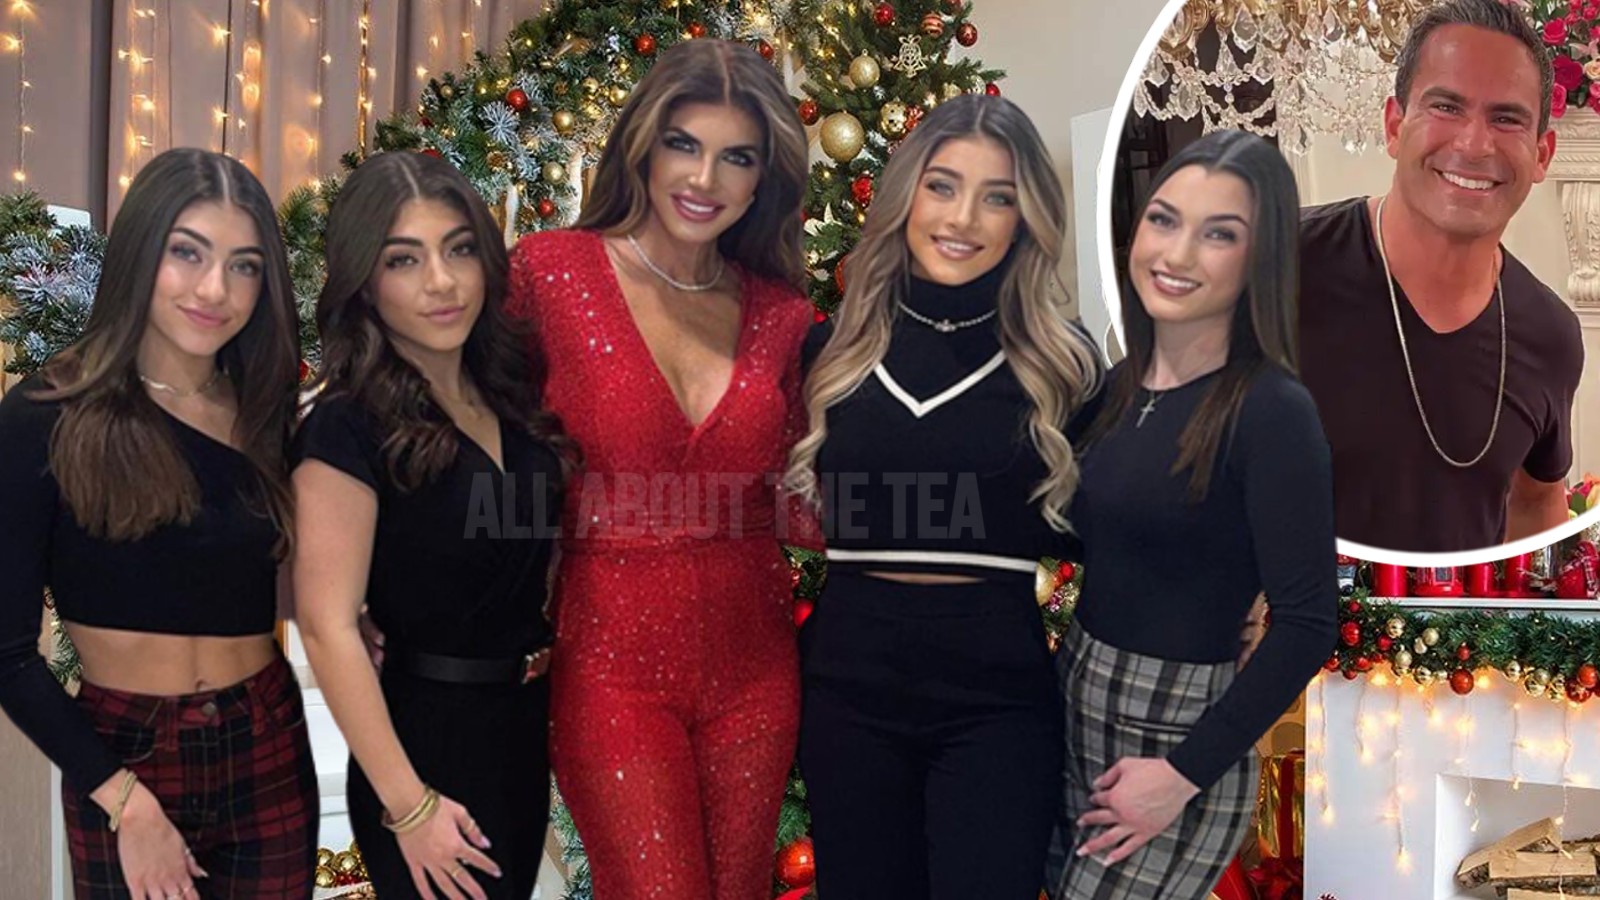 Luis Ruelas Spent Over $37K On Christmas Gifts For Teresa Giudice’s Daughters